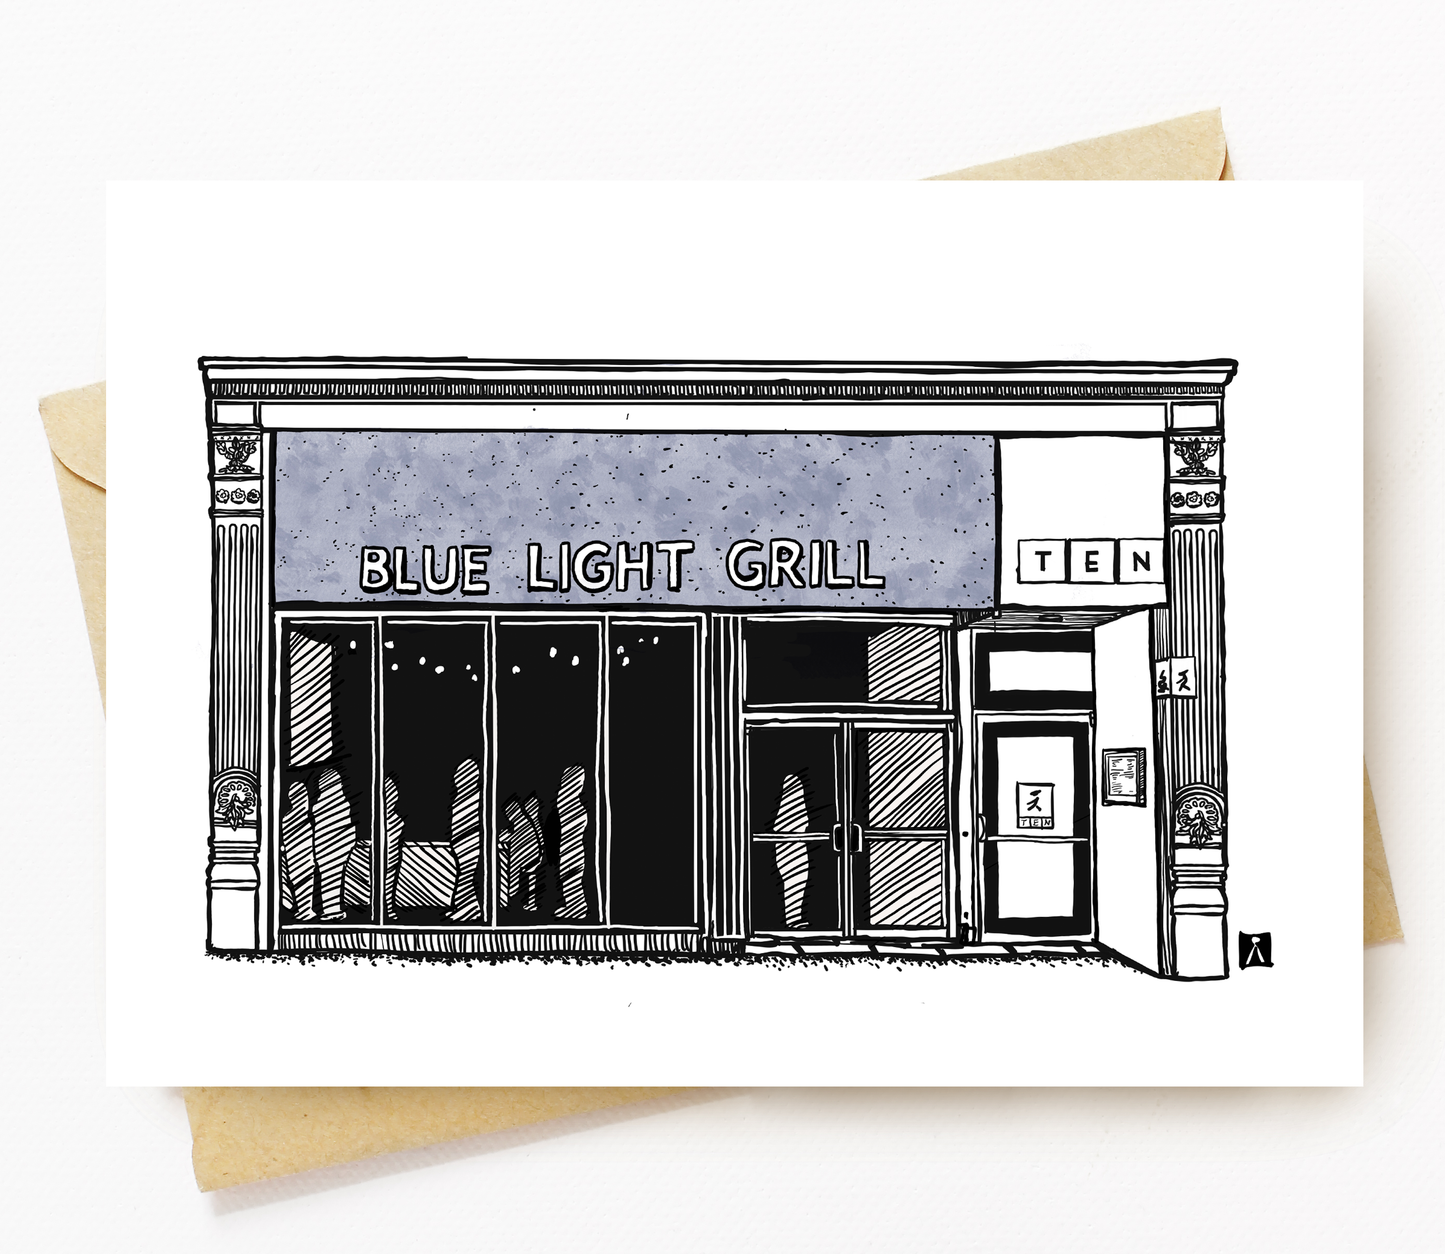 BellavanceInk: Greeting Card of the Charlottesville Area Bar/Restaurant The Blue Light Grill On The Downtown Mall